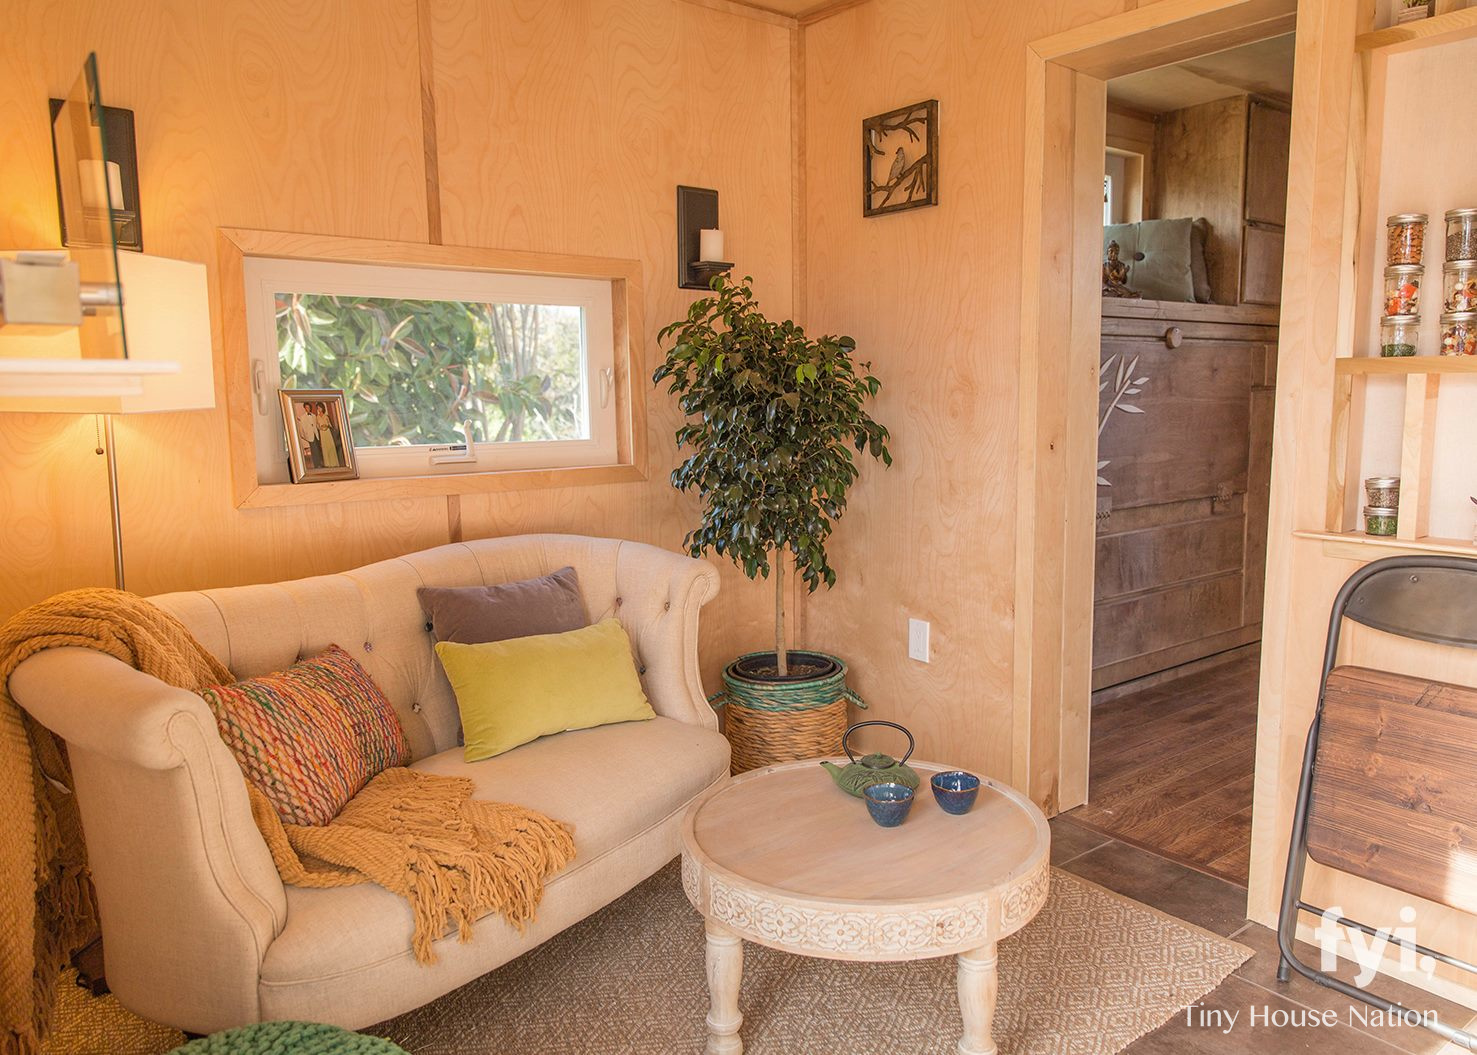 The Homes Of Tiny House Nation